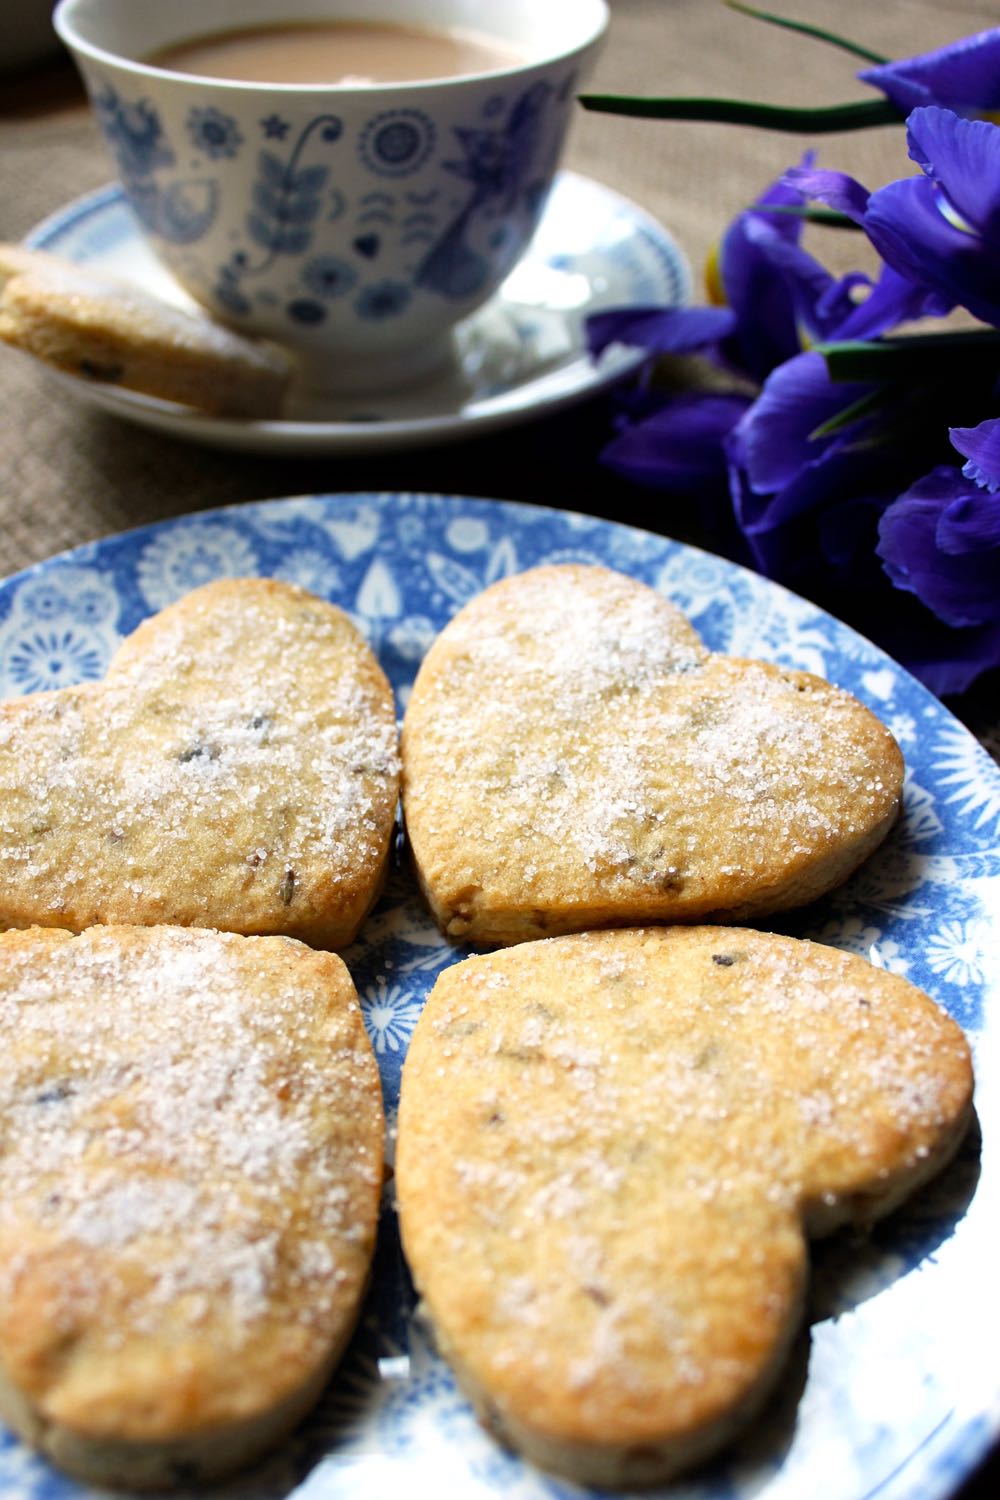 Sugar coated heart shaped lavender biscuits.